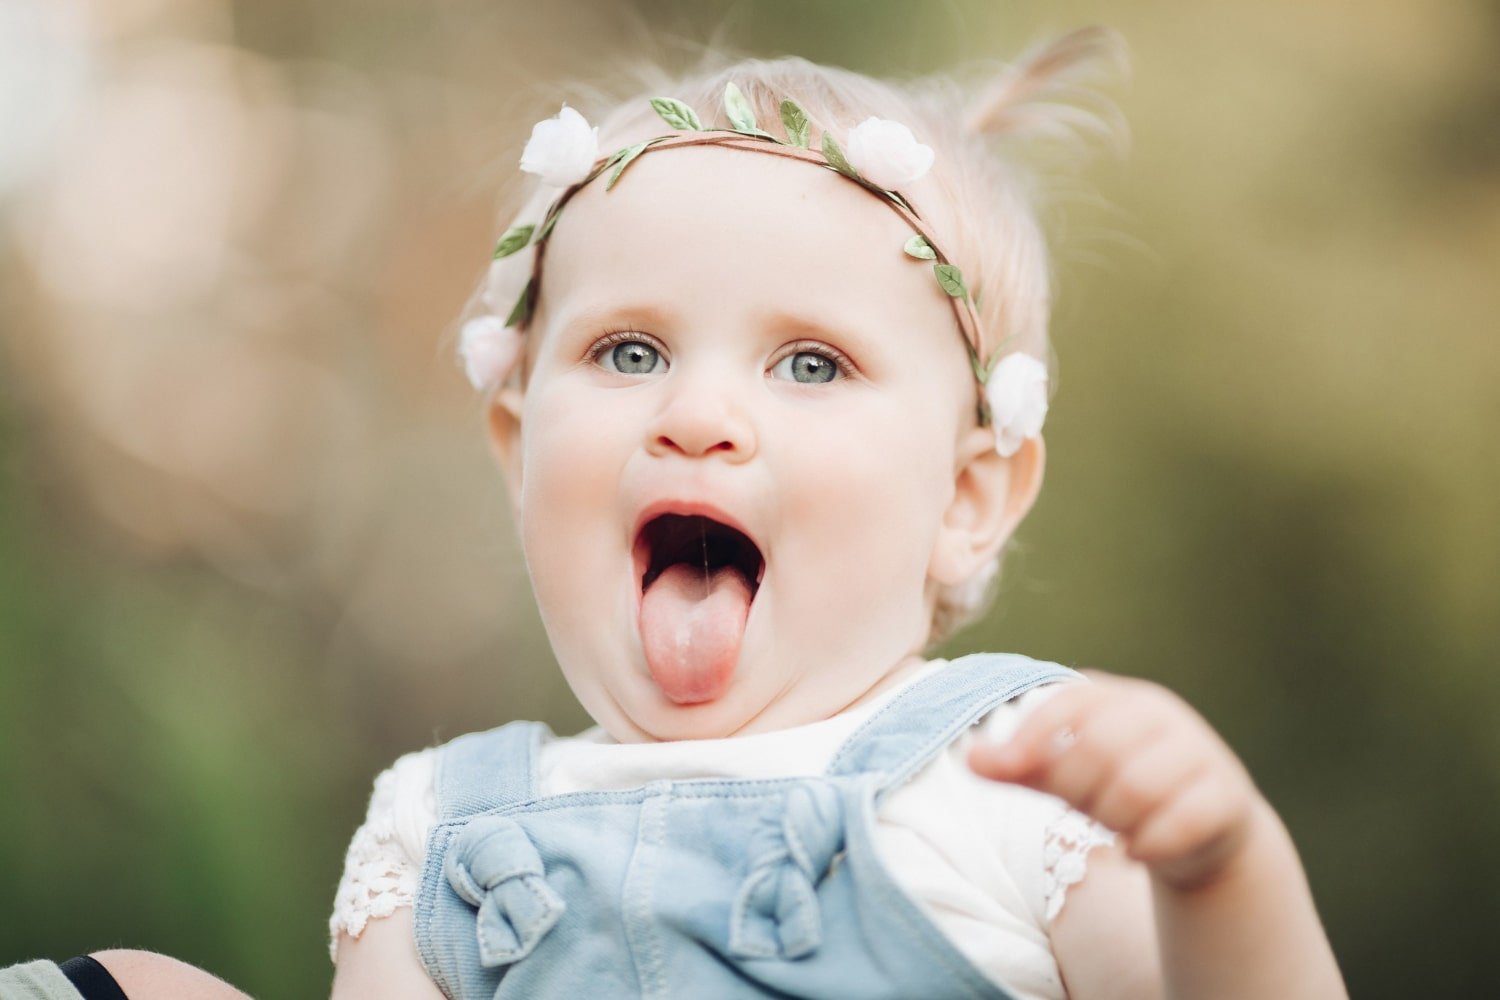 Tongue tie, hypotonia in babies and frenectomy